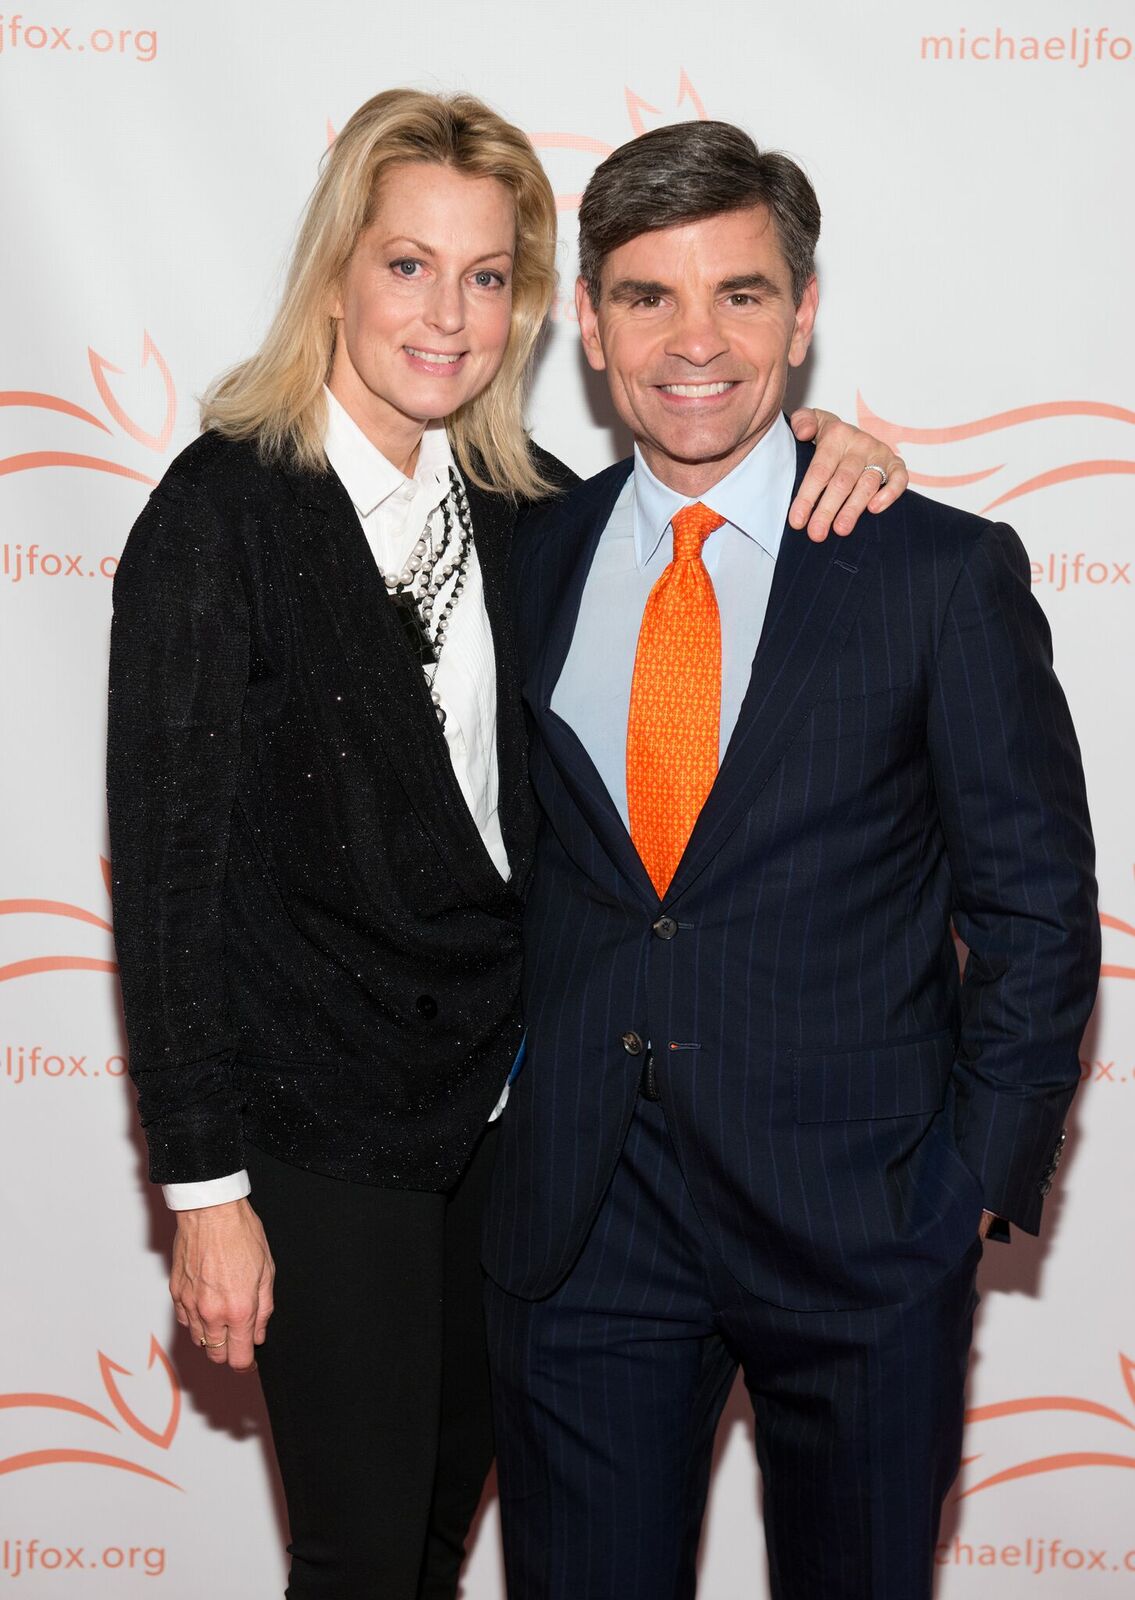 Ali Wentworth and George Stephanopoulos at the Michael J. Fox Foundation's "A Funny Thing Happened On The Way To Cure Parkinson's" Gala on November 14, 2015, in New York City | Photo: Noam Galai/WireImage/Getty Images